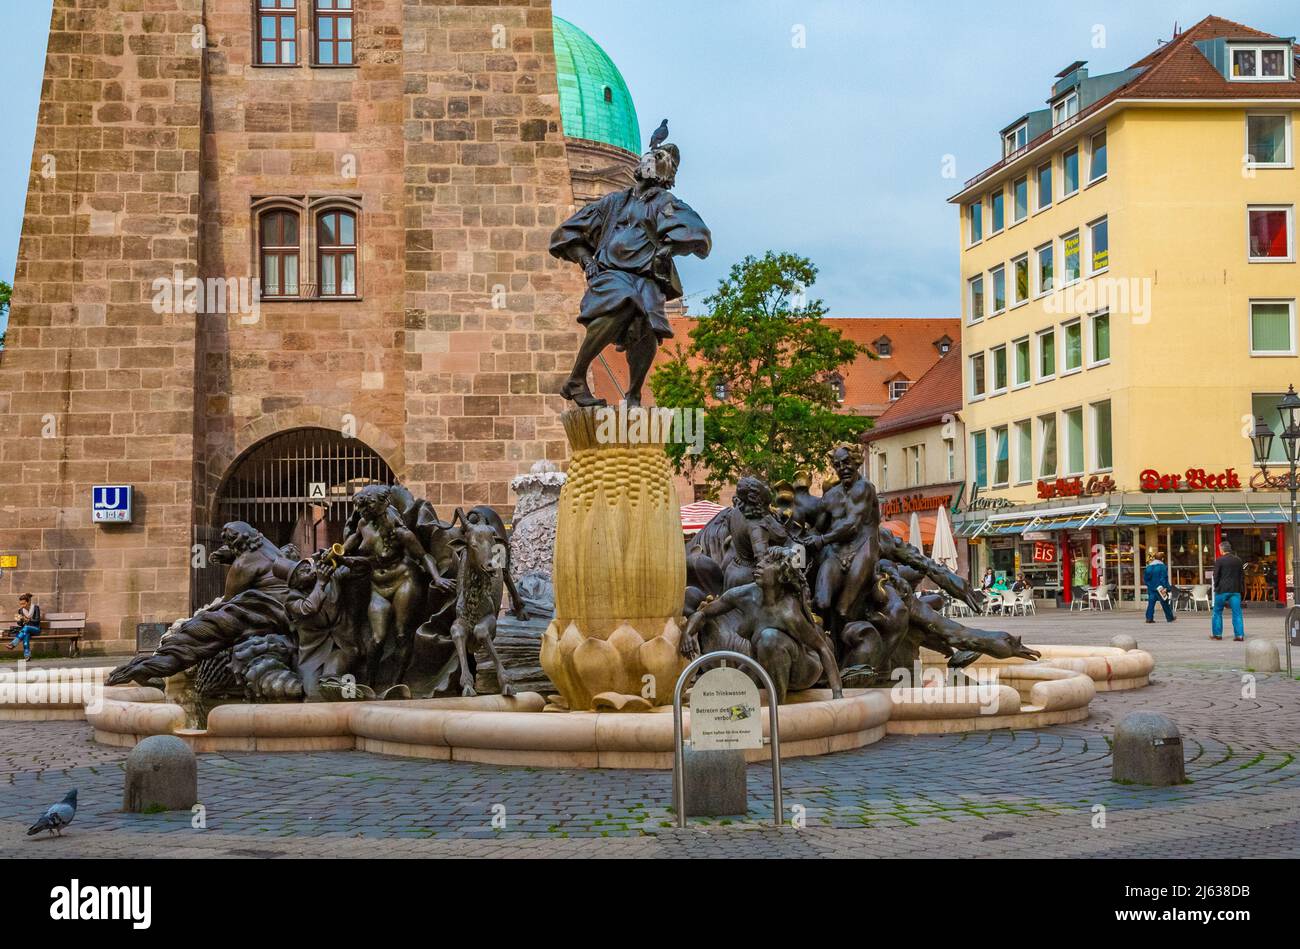 The famous bronze fountain in front of the White Tower, the Ehekarussell or Marriage-Merry-Go-Round in Nürnberg. The sculptural composition relates to... Stock Photo